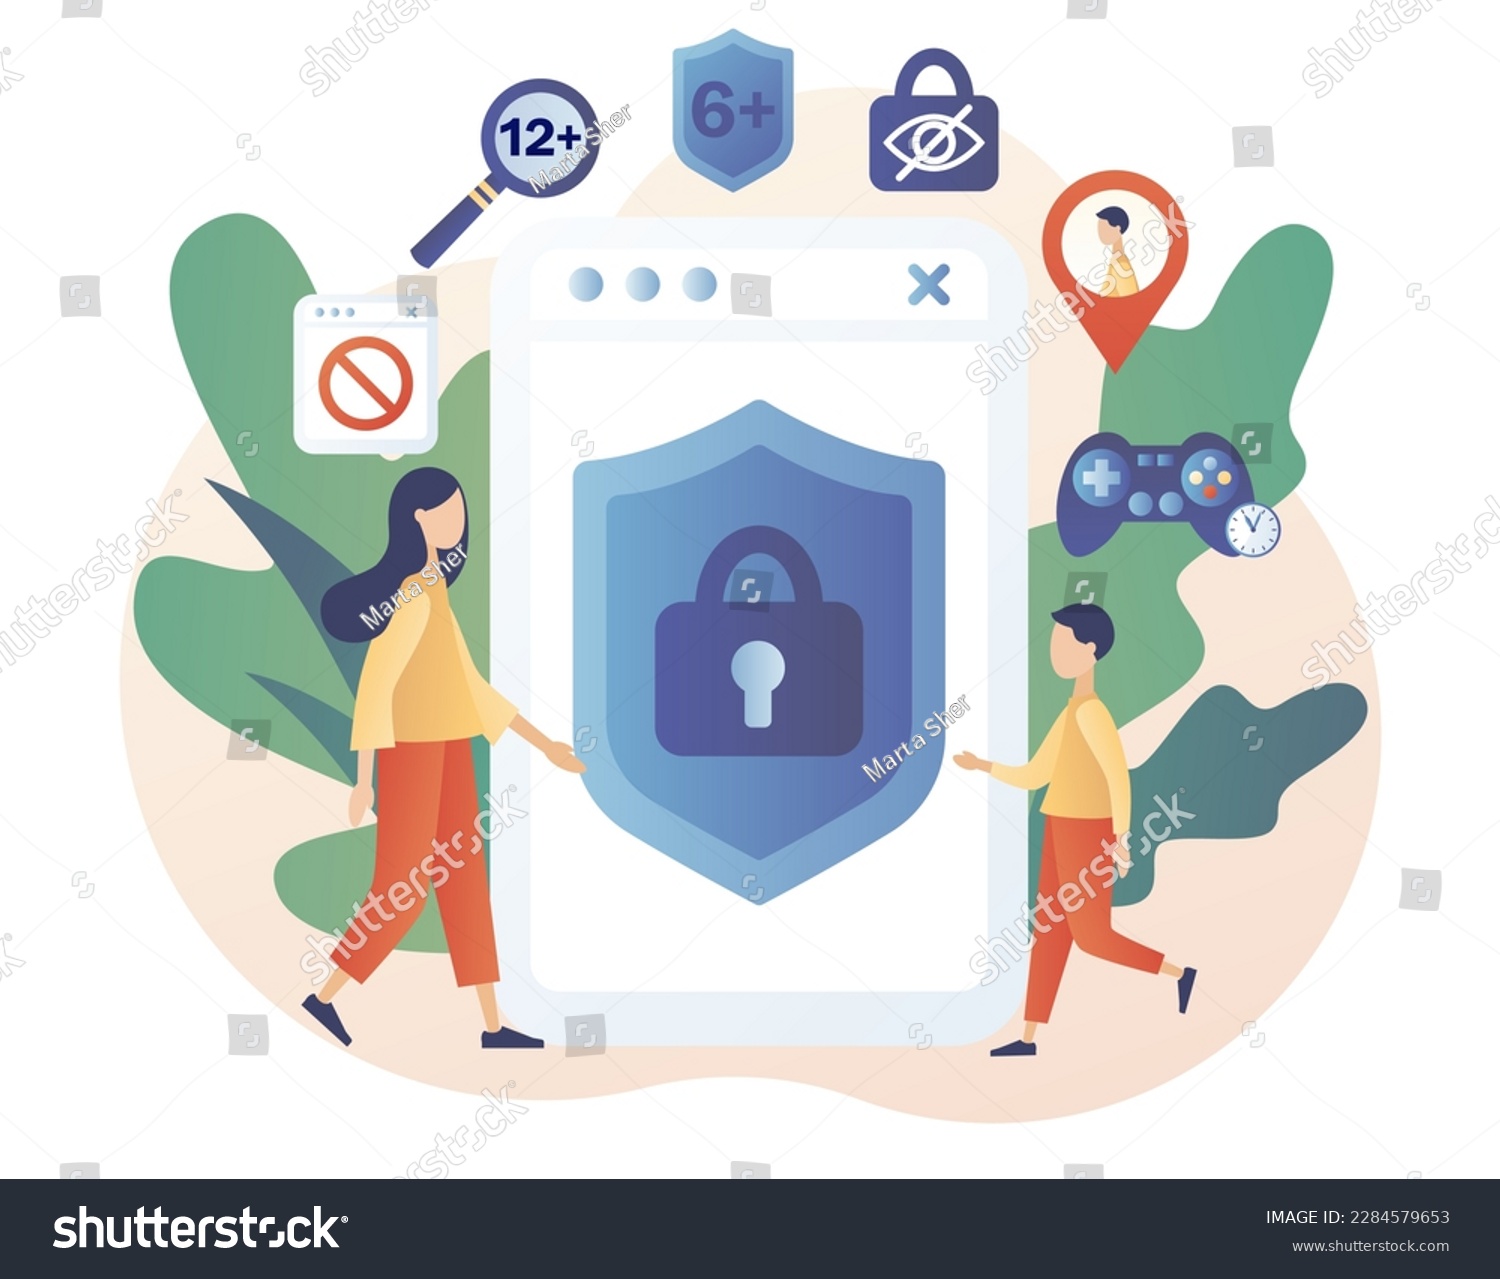 SVG of Parental control software. Access restrict. Blocked, prohibited or inappropriate content for kids. Safe internet. Modern flat cartoon style. Vector illustration on white background svg